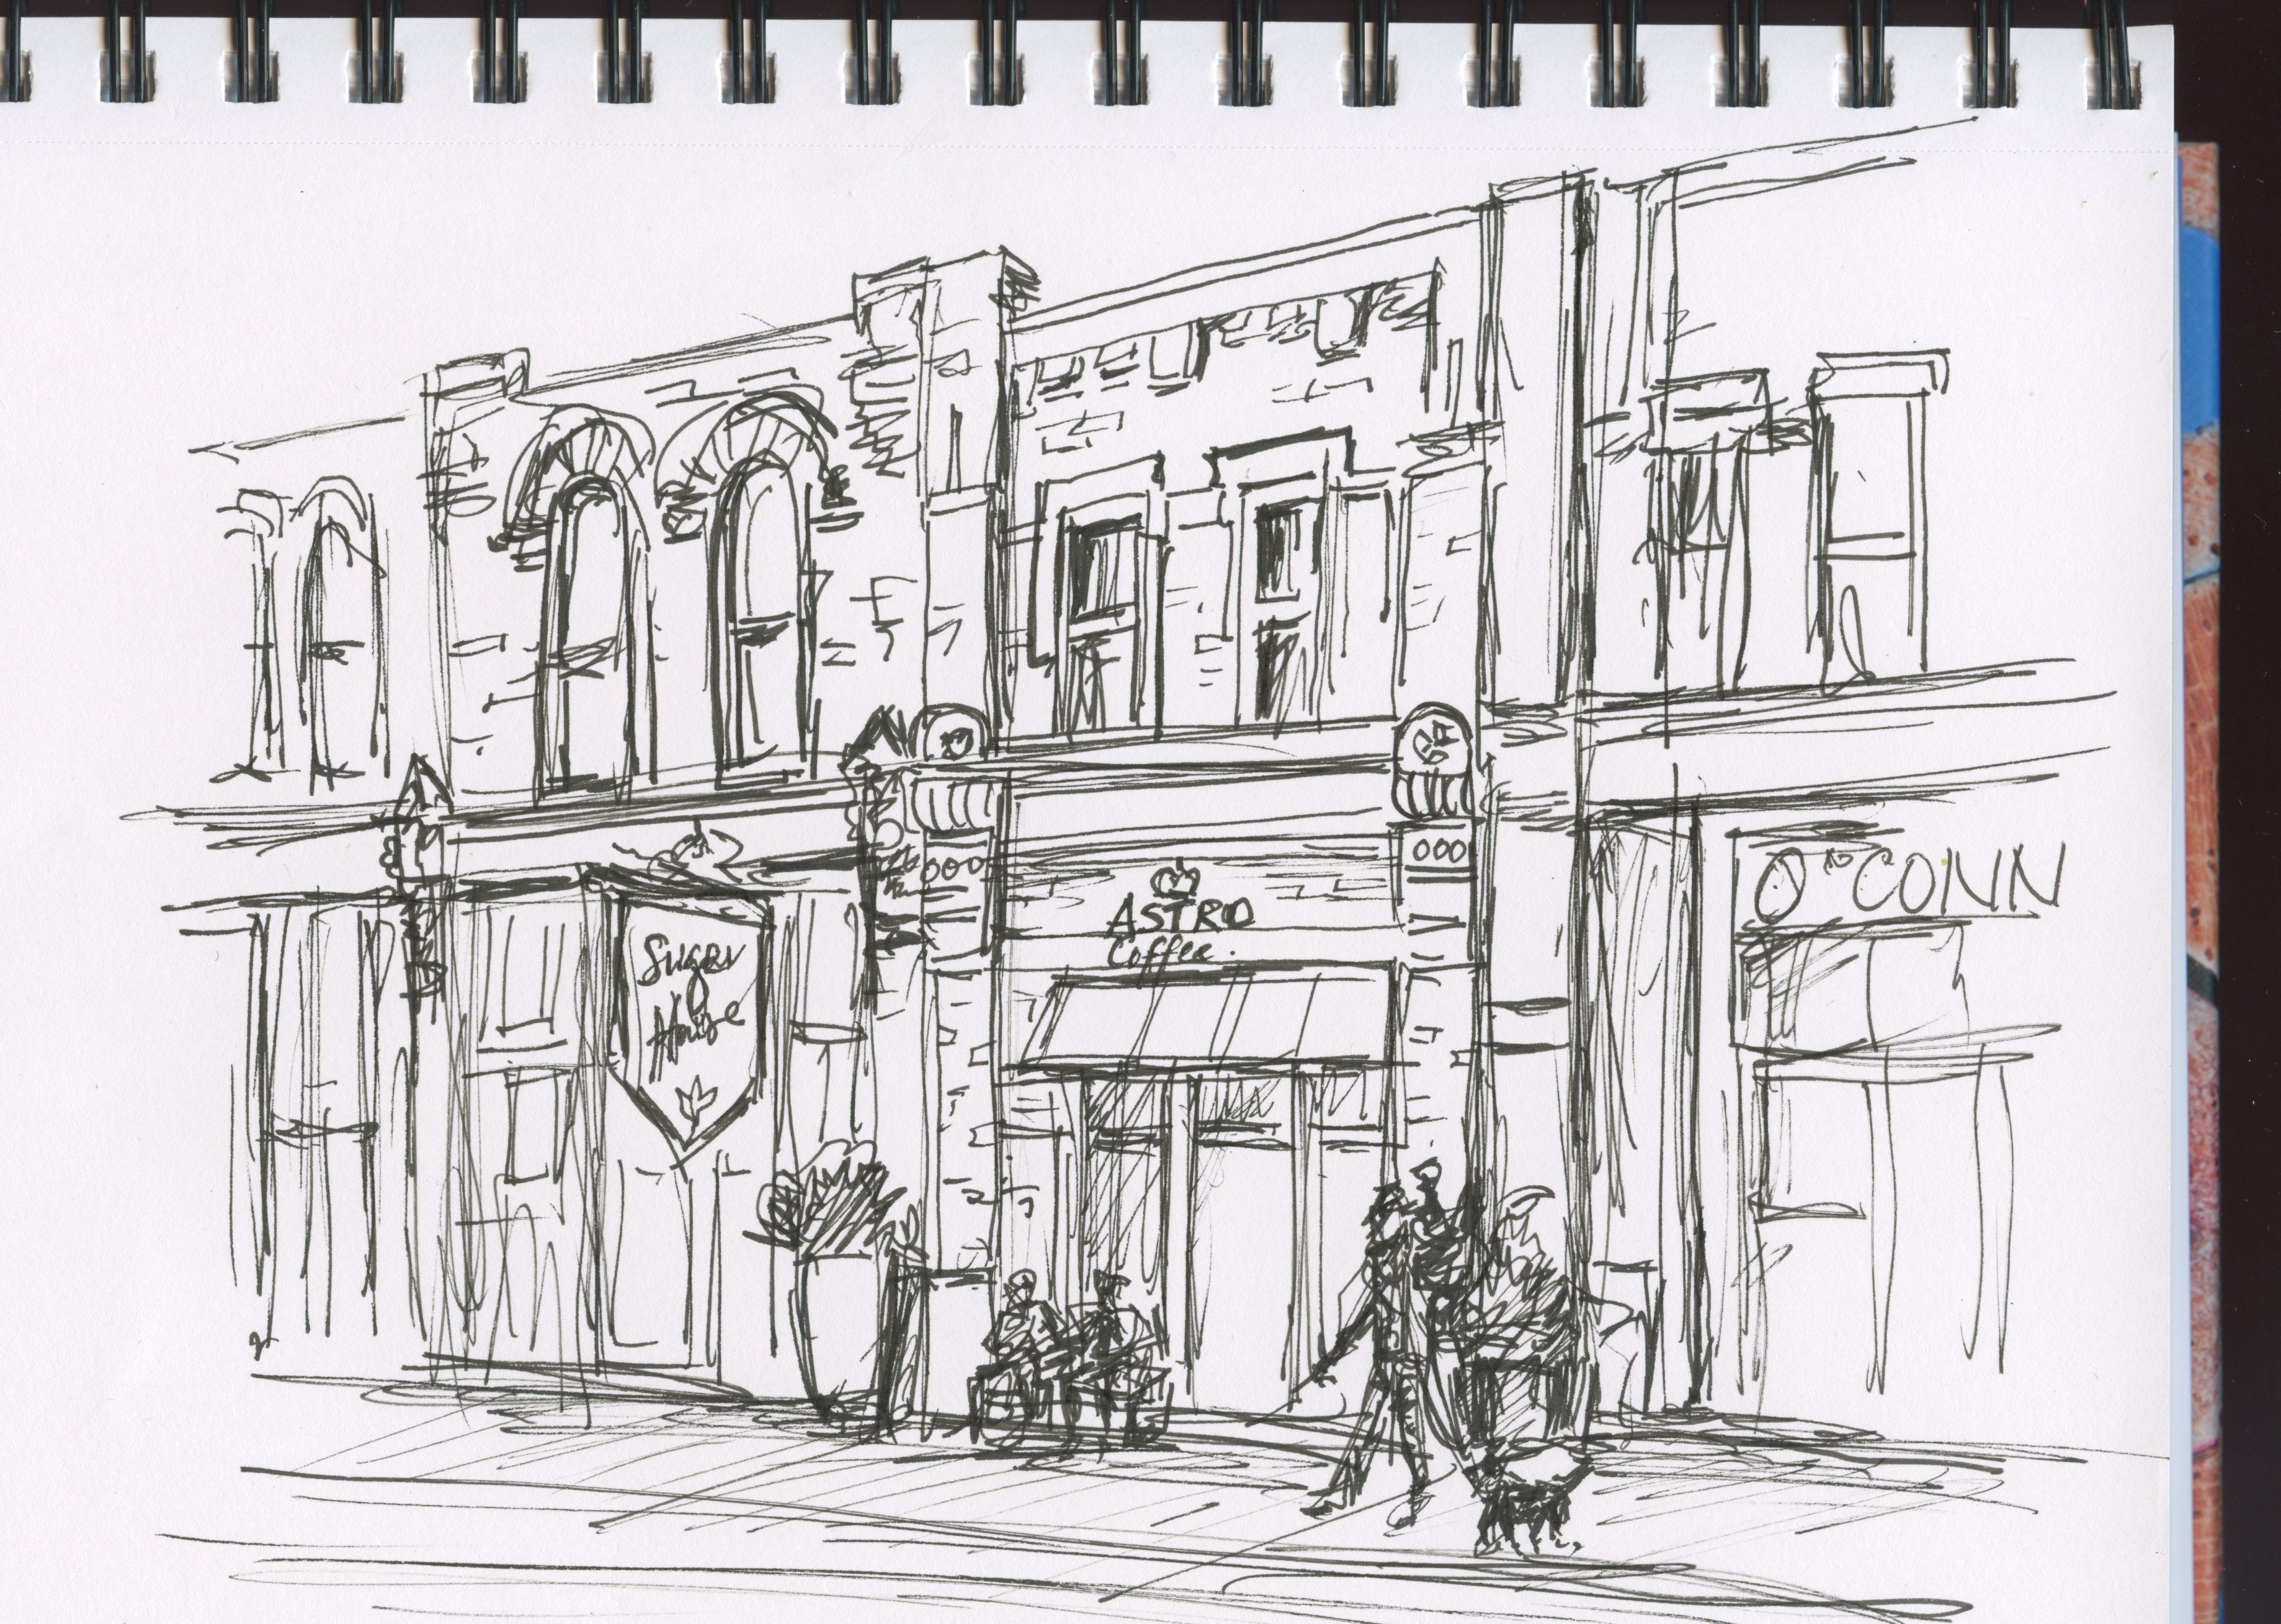 Leisa Collins stopped for a coffee, but sketched it first! Nice historic rehab'ed San Antonio building 